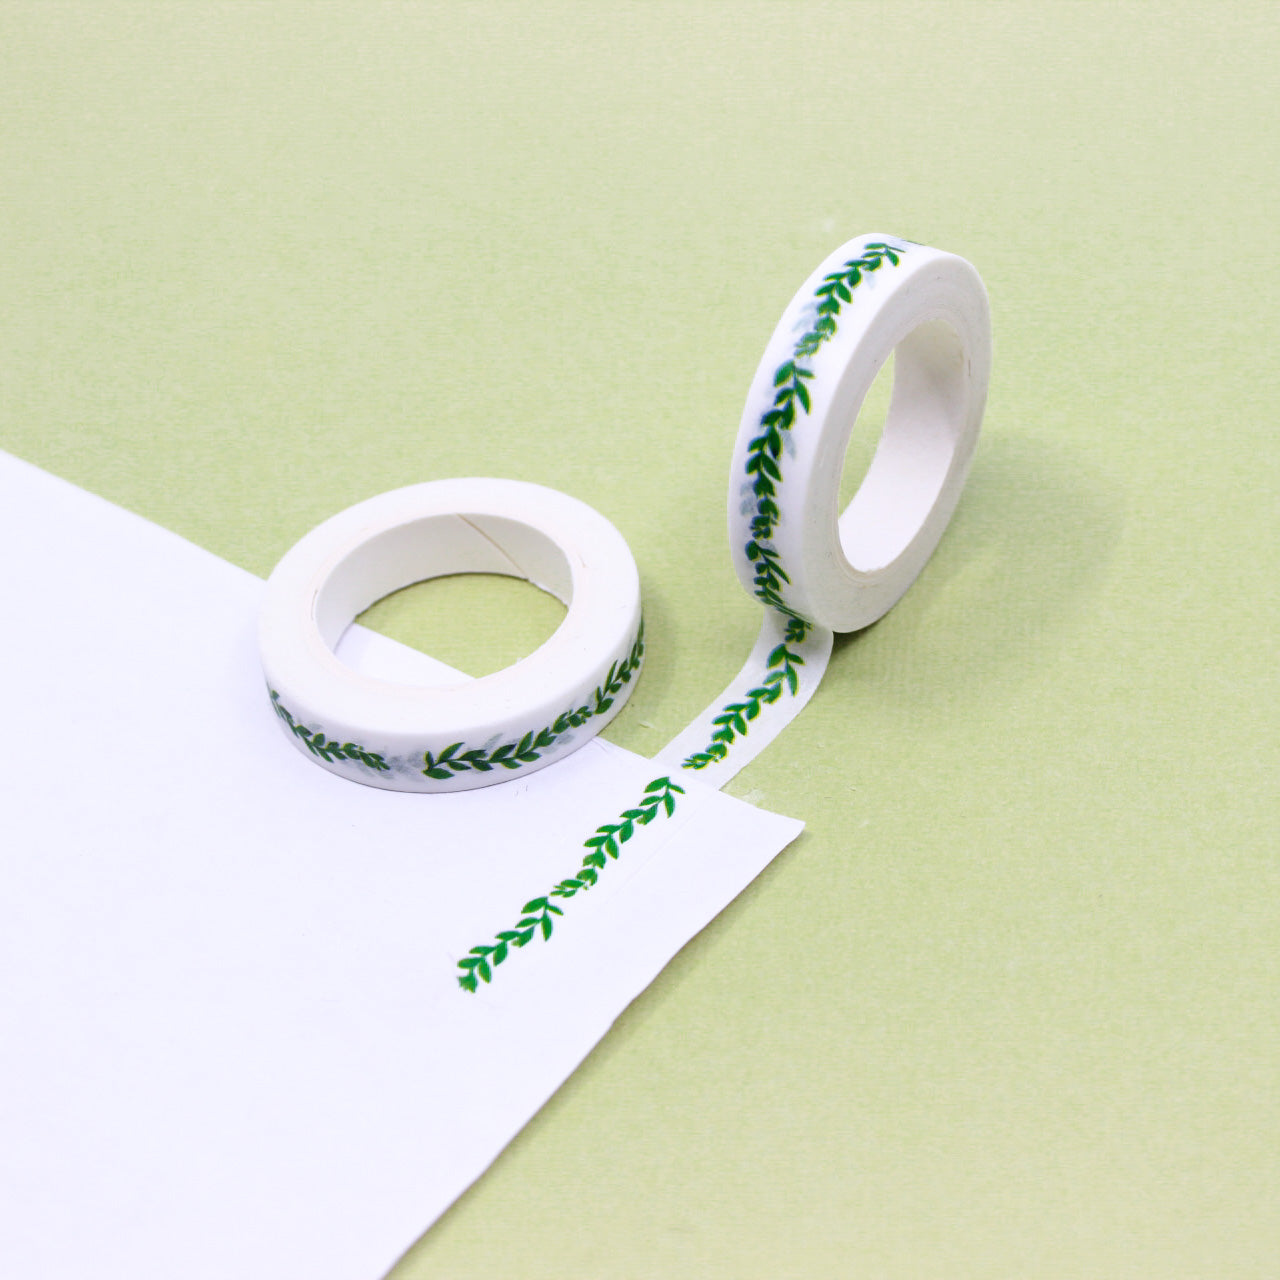 Green Hues Skinny Washi Tape – The Happy Planner